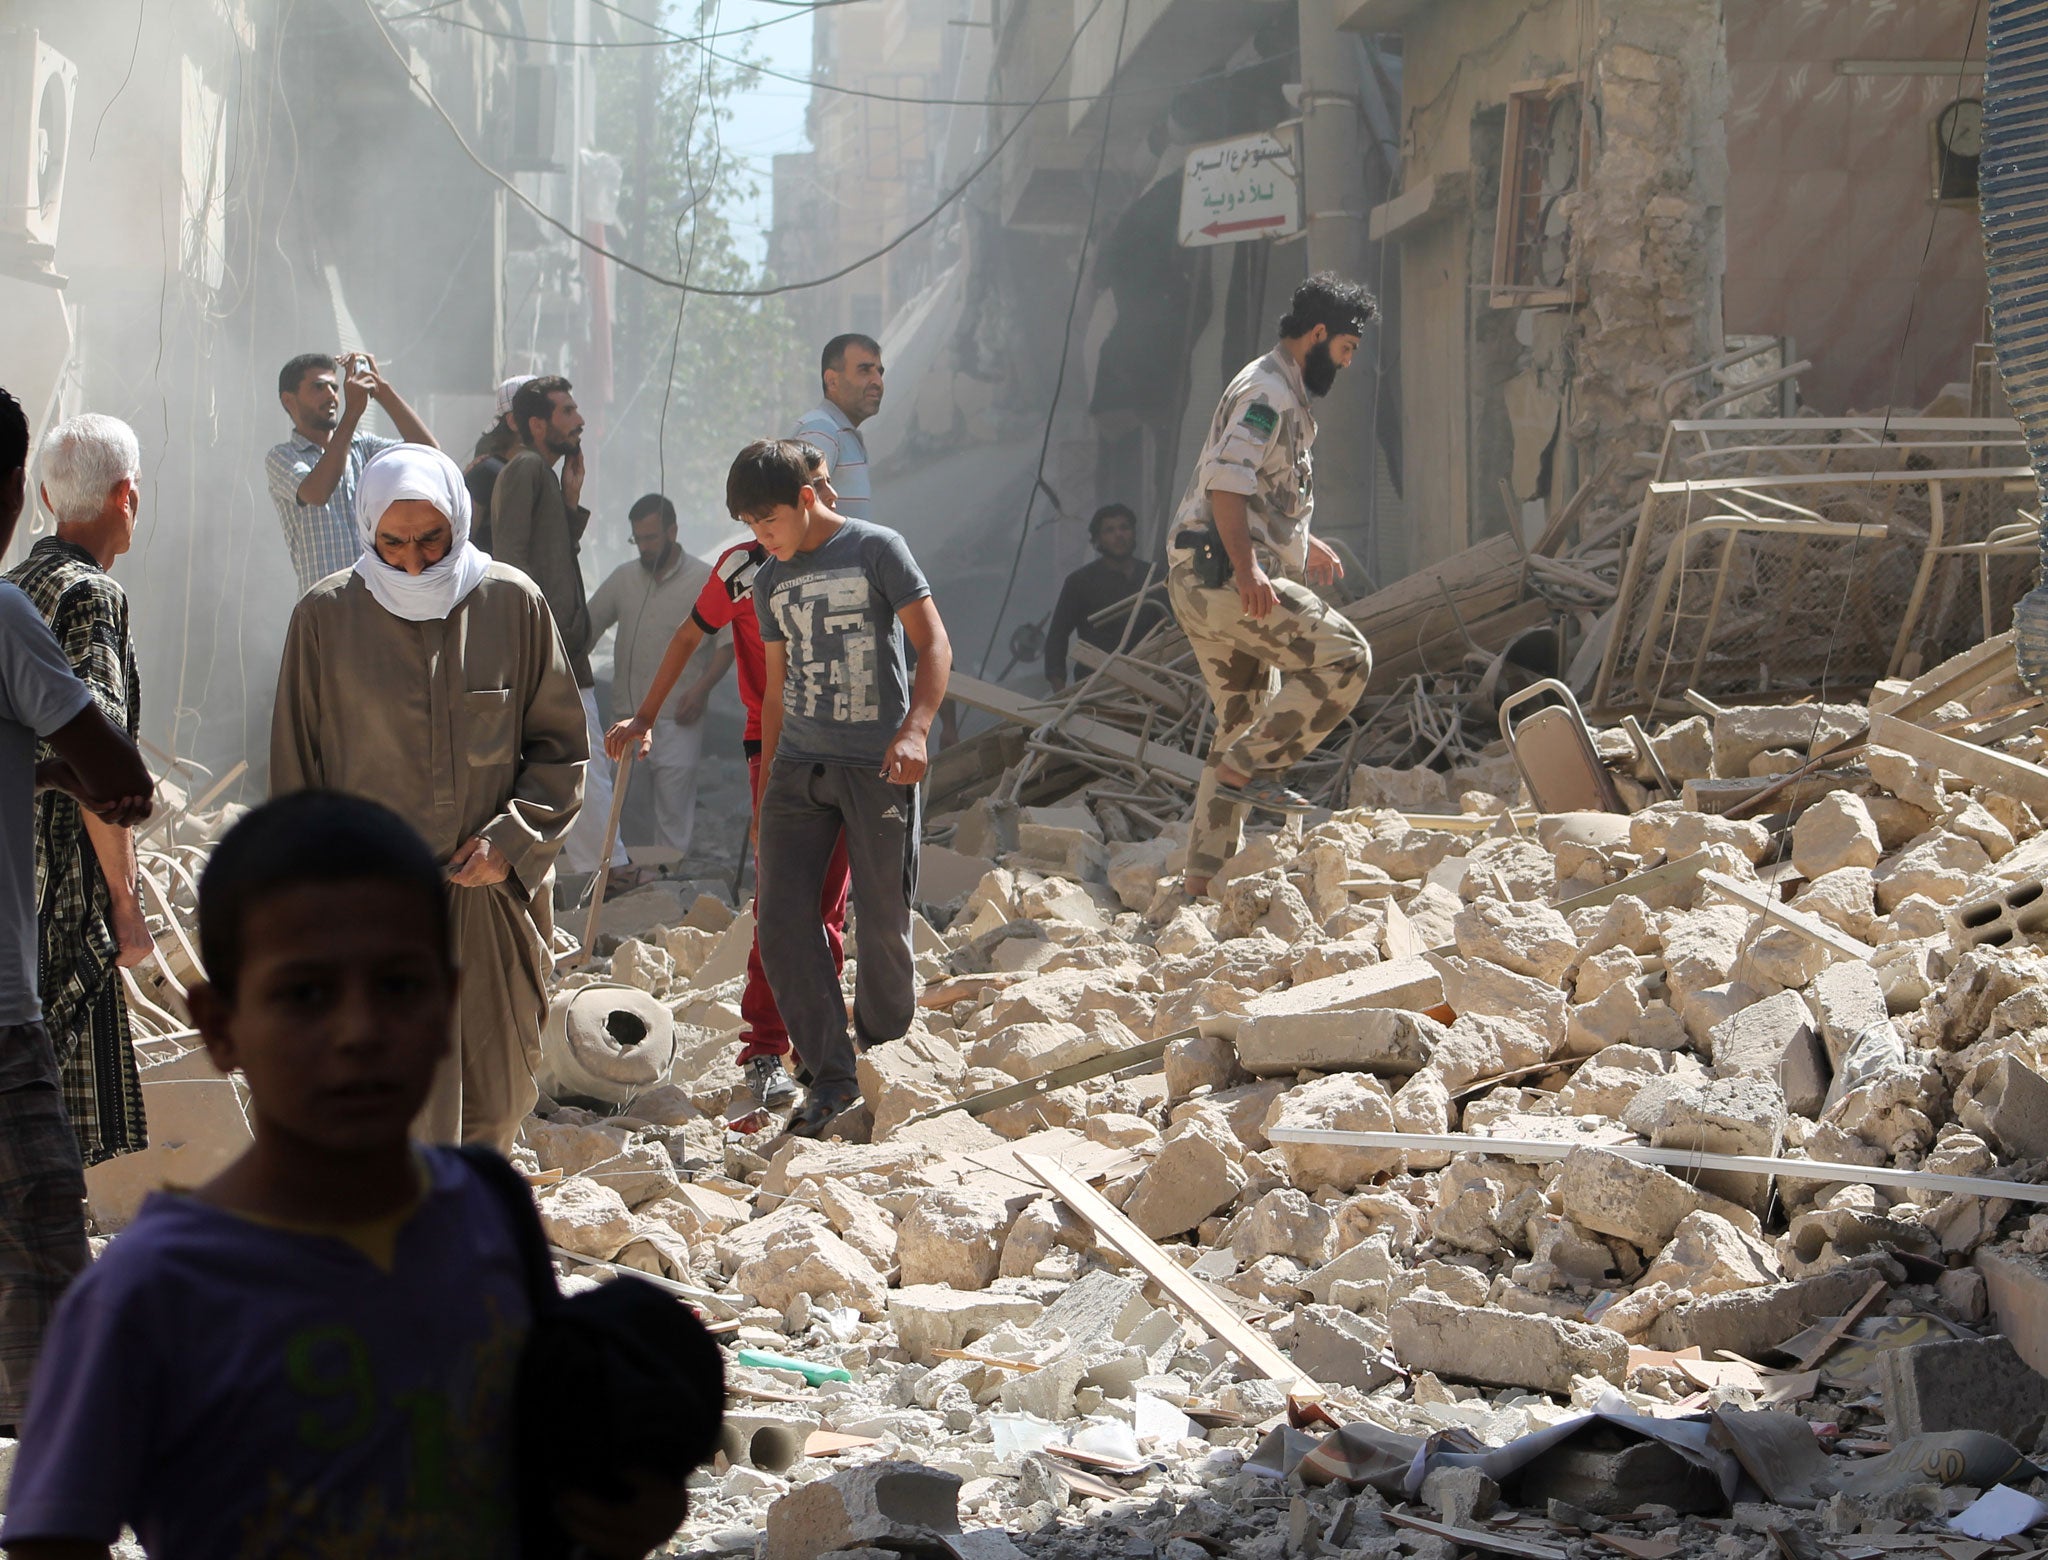 Residents of Syria's eastern town of Deir Ezzor walk past the debris of a building reportedly hit by a missile on September 26, 2013. The Syrian Observatory for Human Rights said that there was fighting between rebels and units of the jihadist Islamic State of Iraq and the Levant (ISIS) in Albu Kamal, with five people killed.